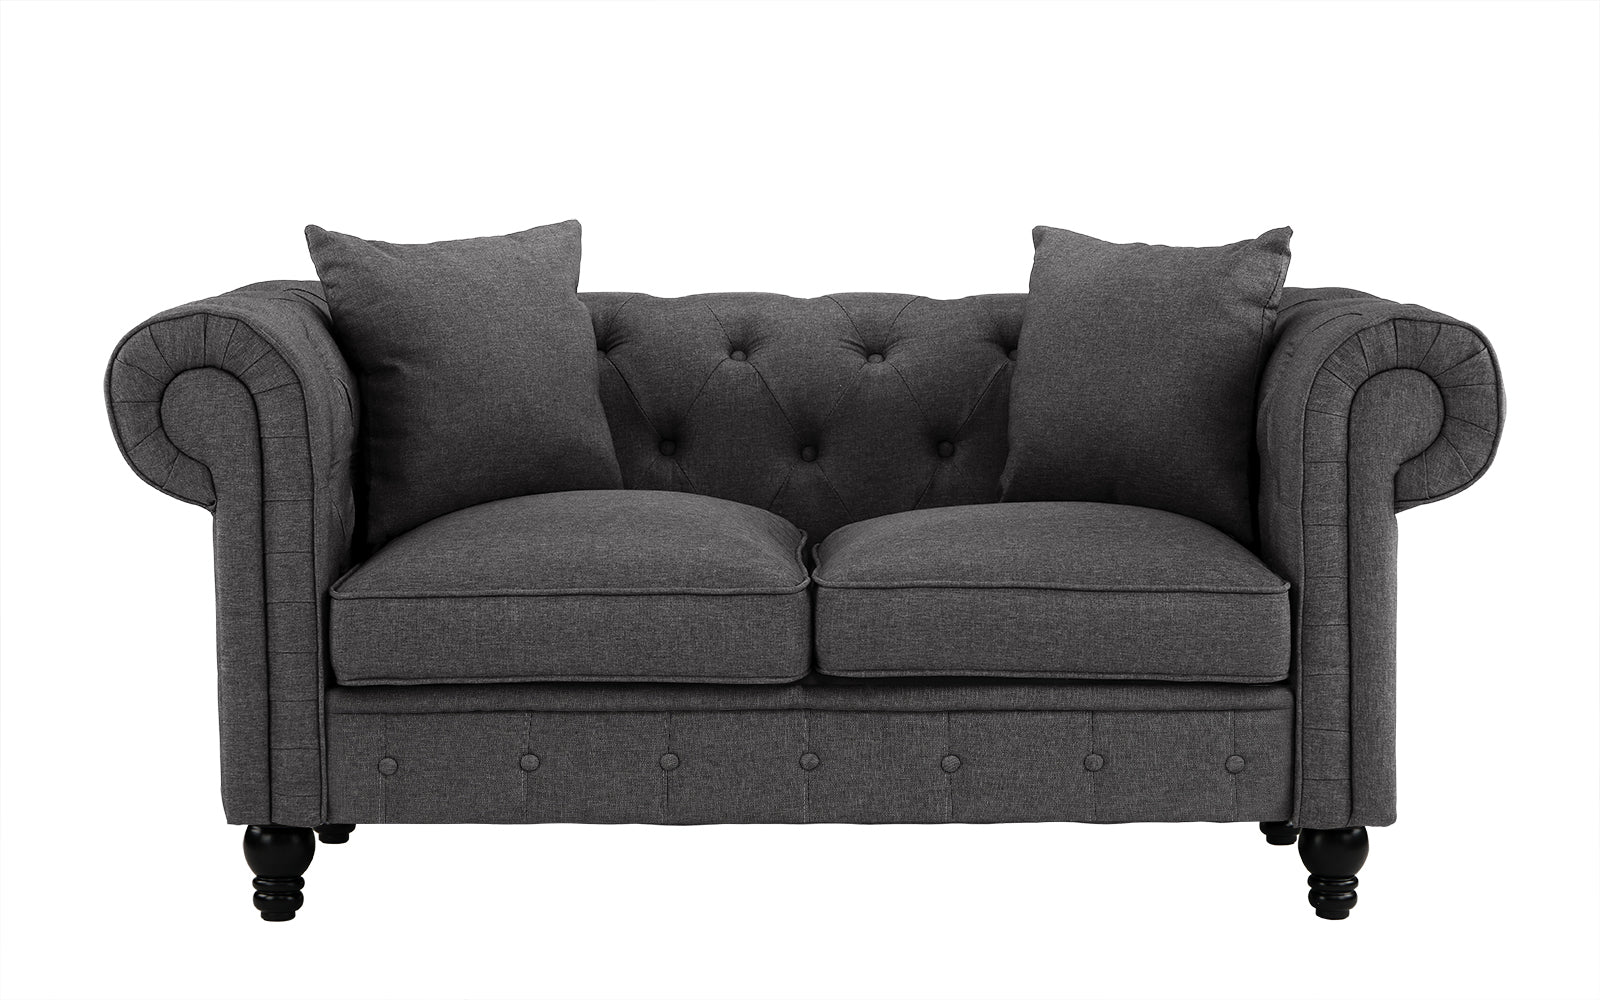 Easton Classic Scroll Arm Victorian Chesterfield Loveseat